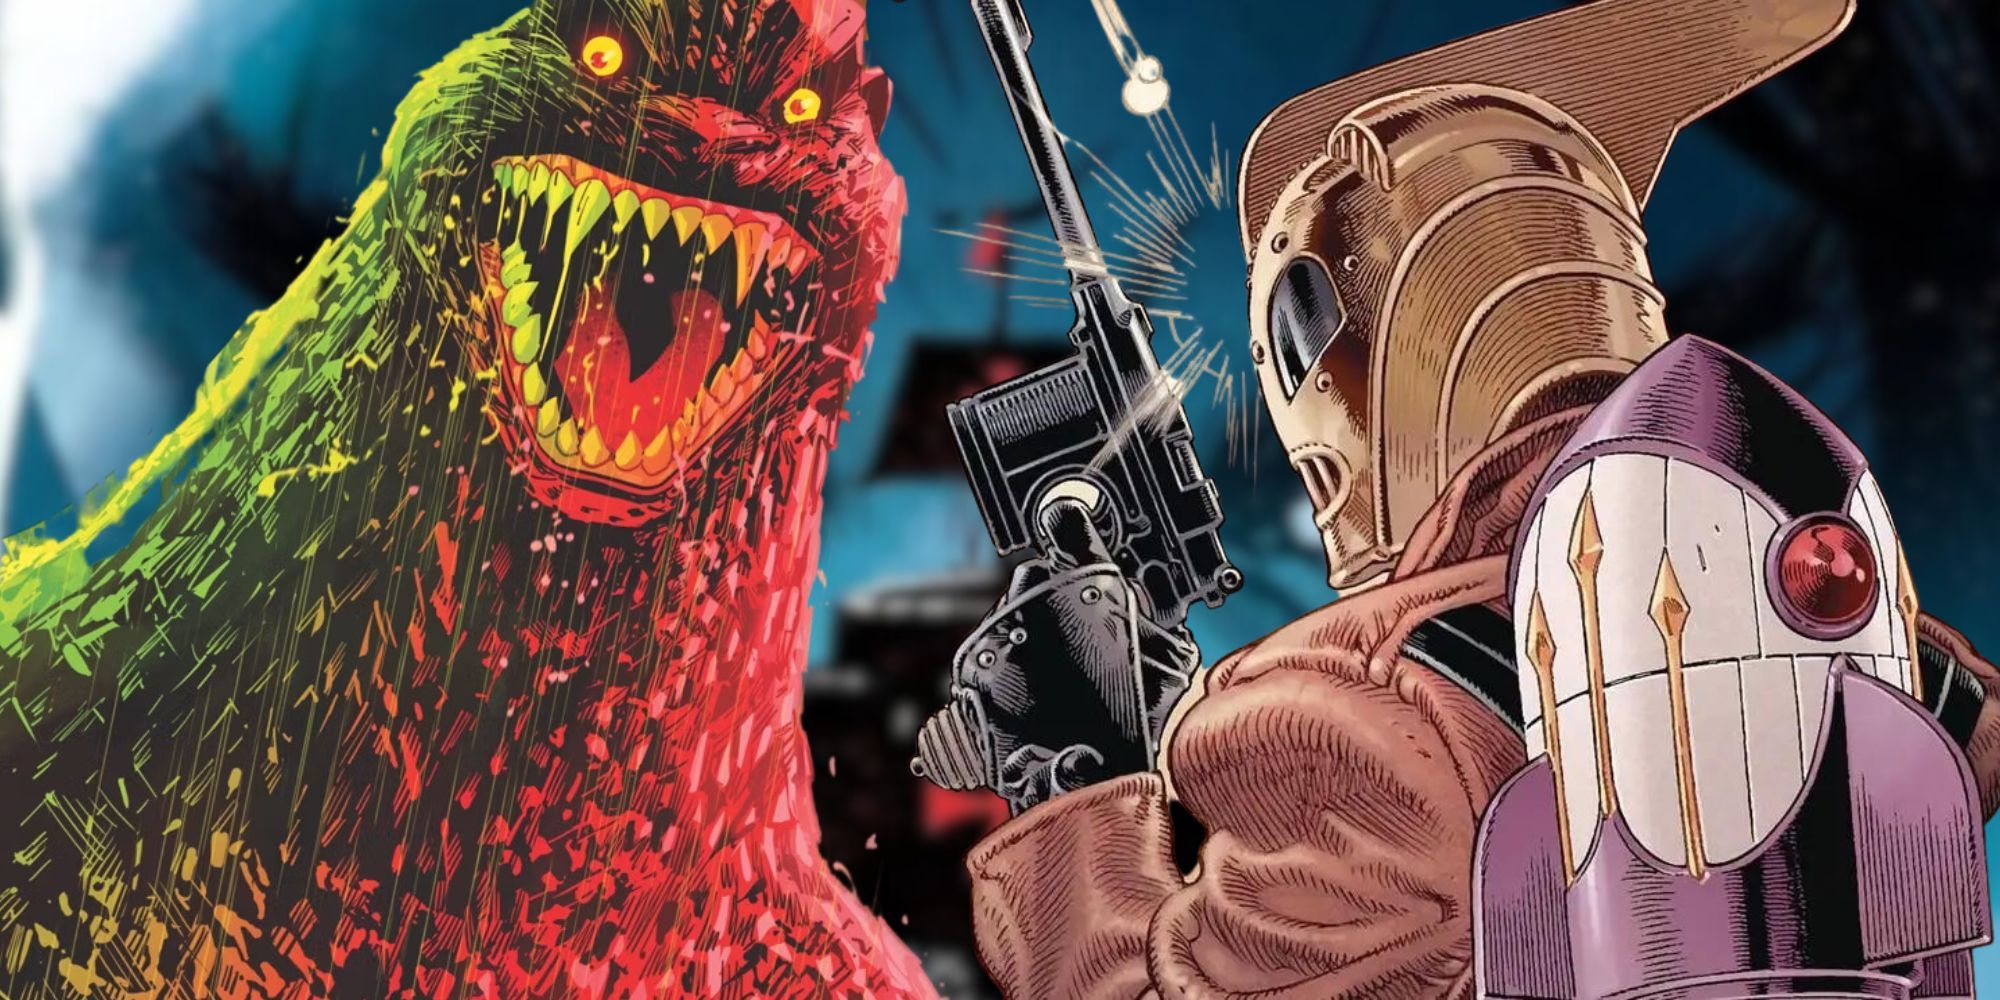 A composite image of IDW Rocketeer and Godzilla in the comics